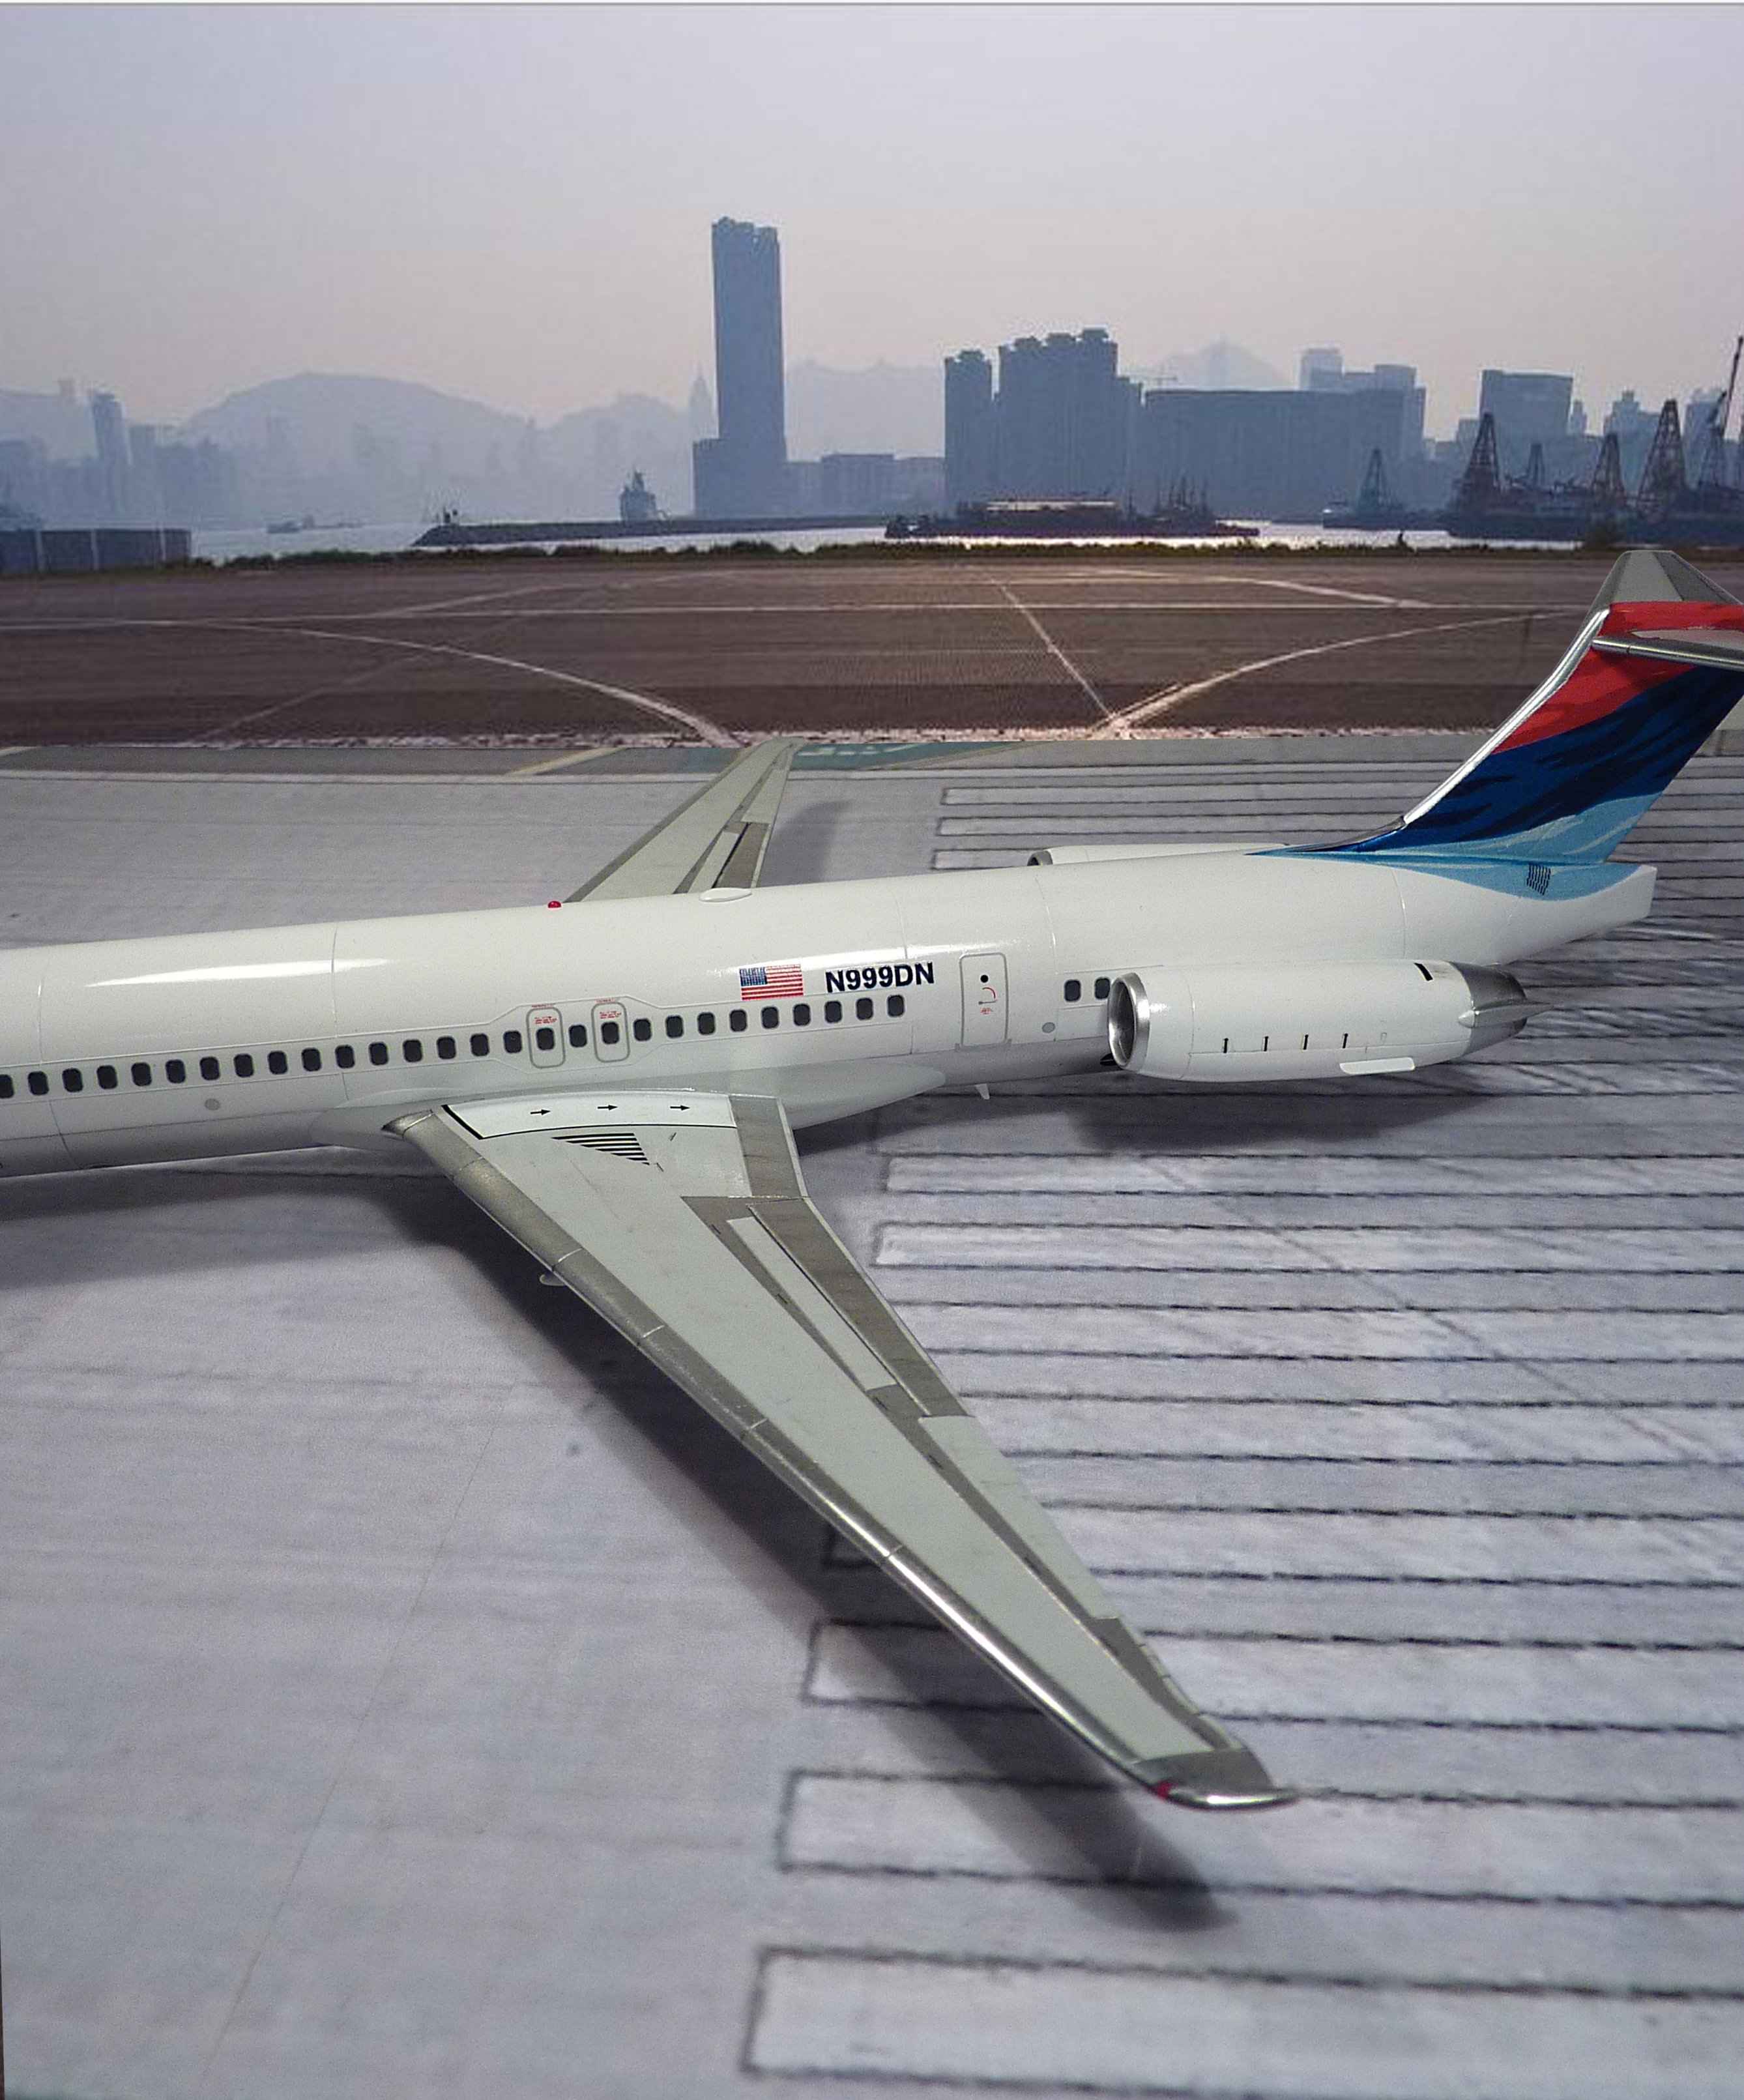 MD-88 Delta airlines [Minicraft] 1/144 279209P1030023mod1